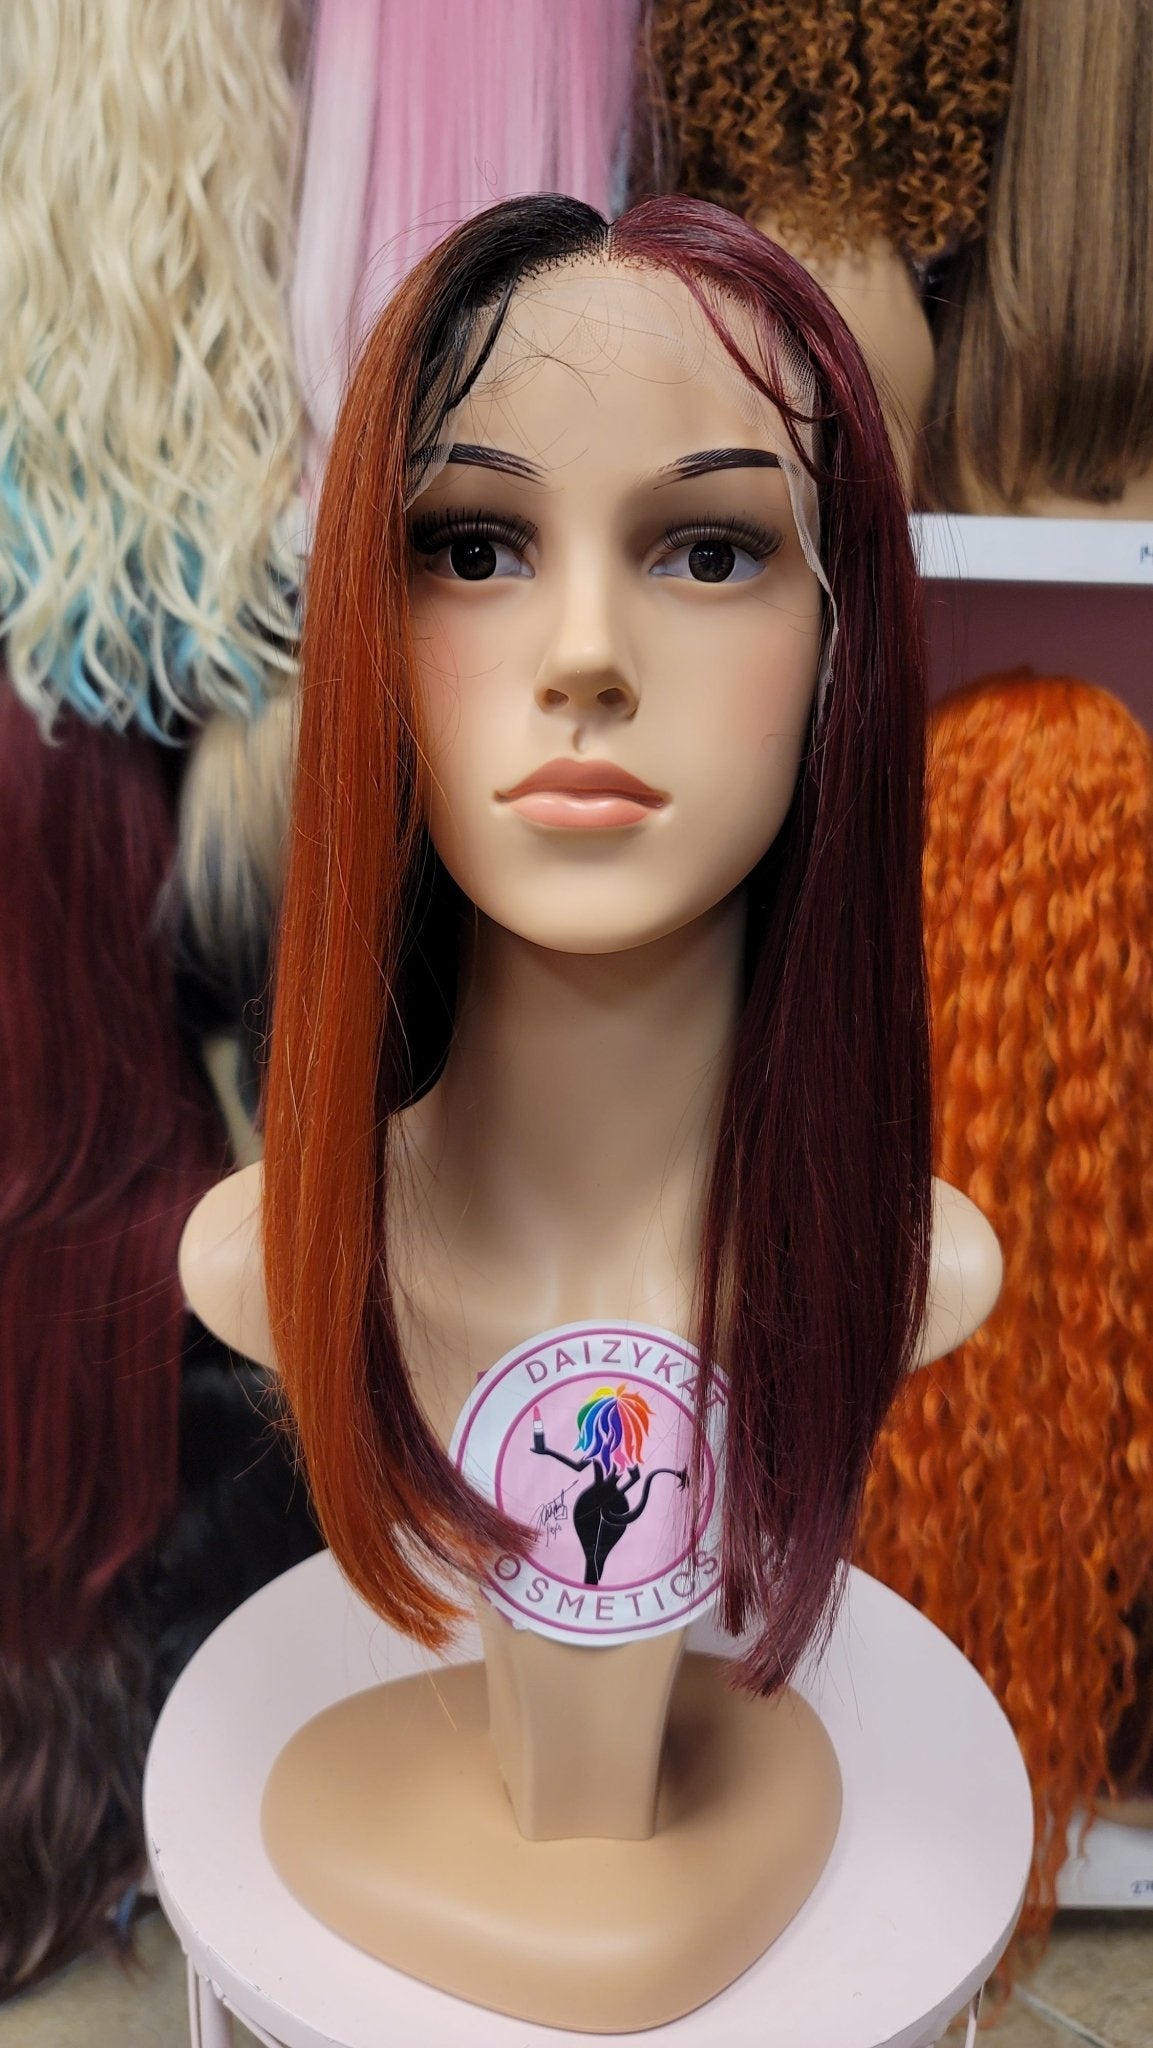 390 Tokyo - Middle Part Lace Front Wig - RED/COPPER - DaizyKat Cosmetics 390 Tokyo - Middle Part Lace Front Wig - RED/COPPER DaizyKat Cosmetics Wigs